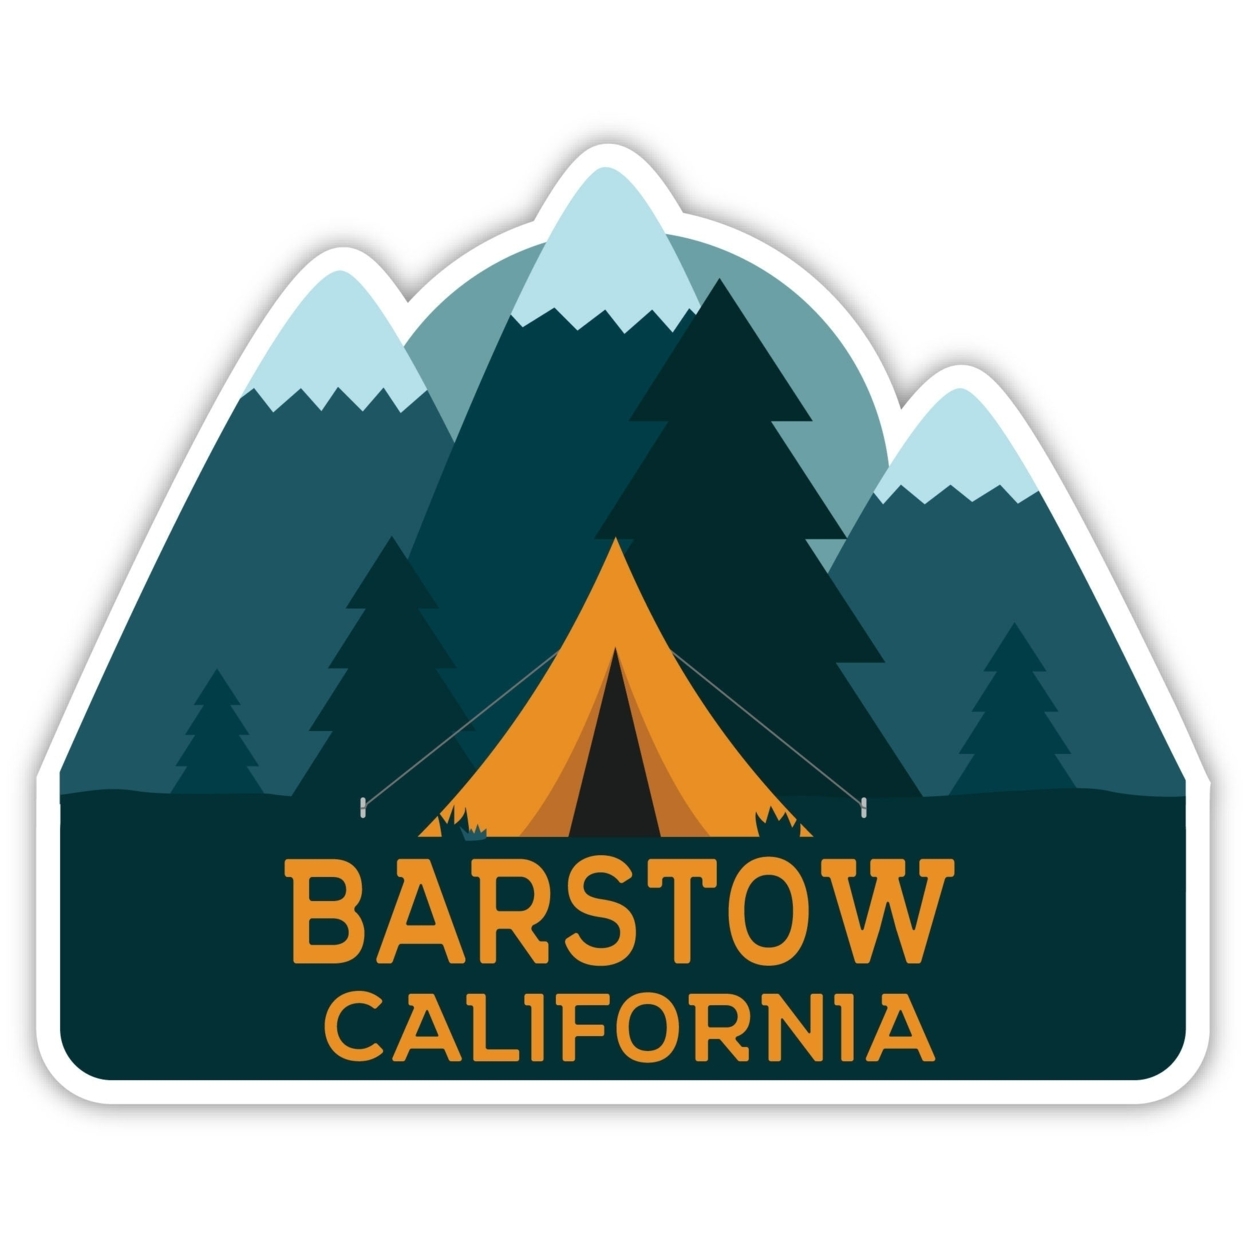 Barstow California Souvenir Decorative Stickers (Choose Theme And Size) - 4-Pack, 8-Inch, Adventures Awaits